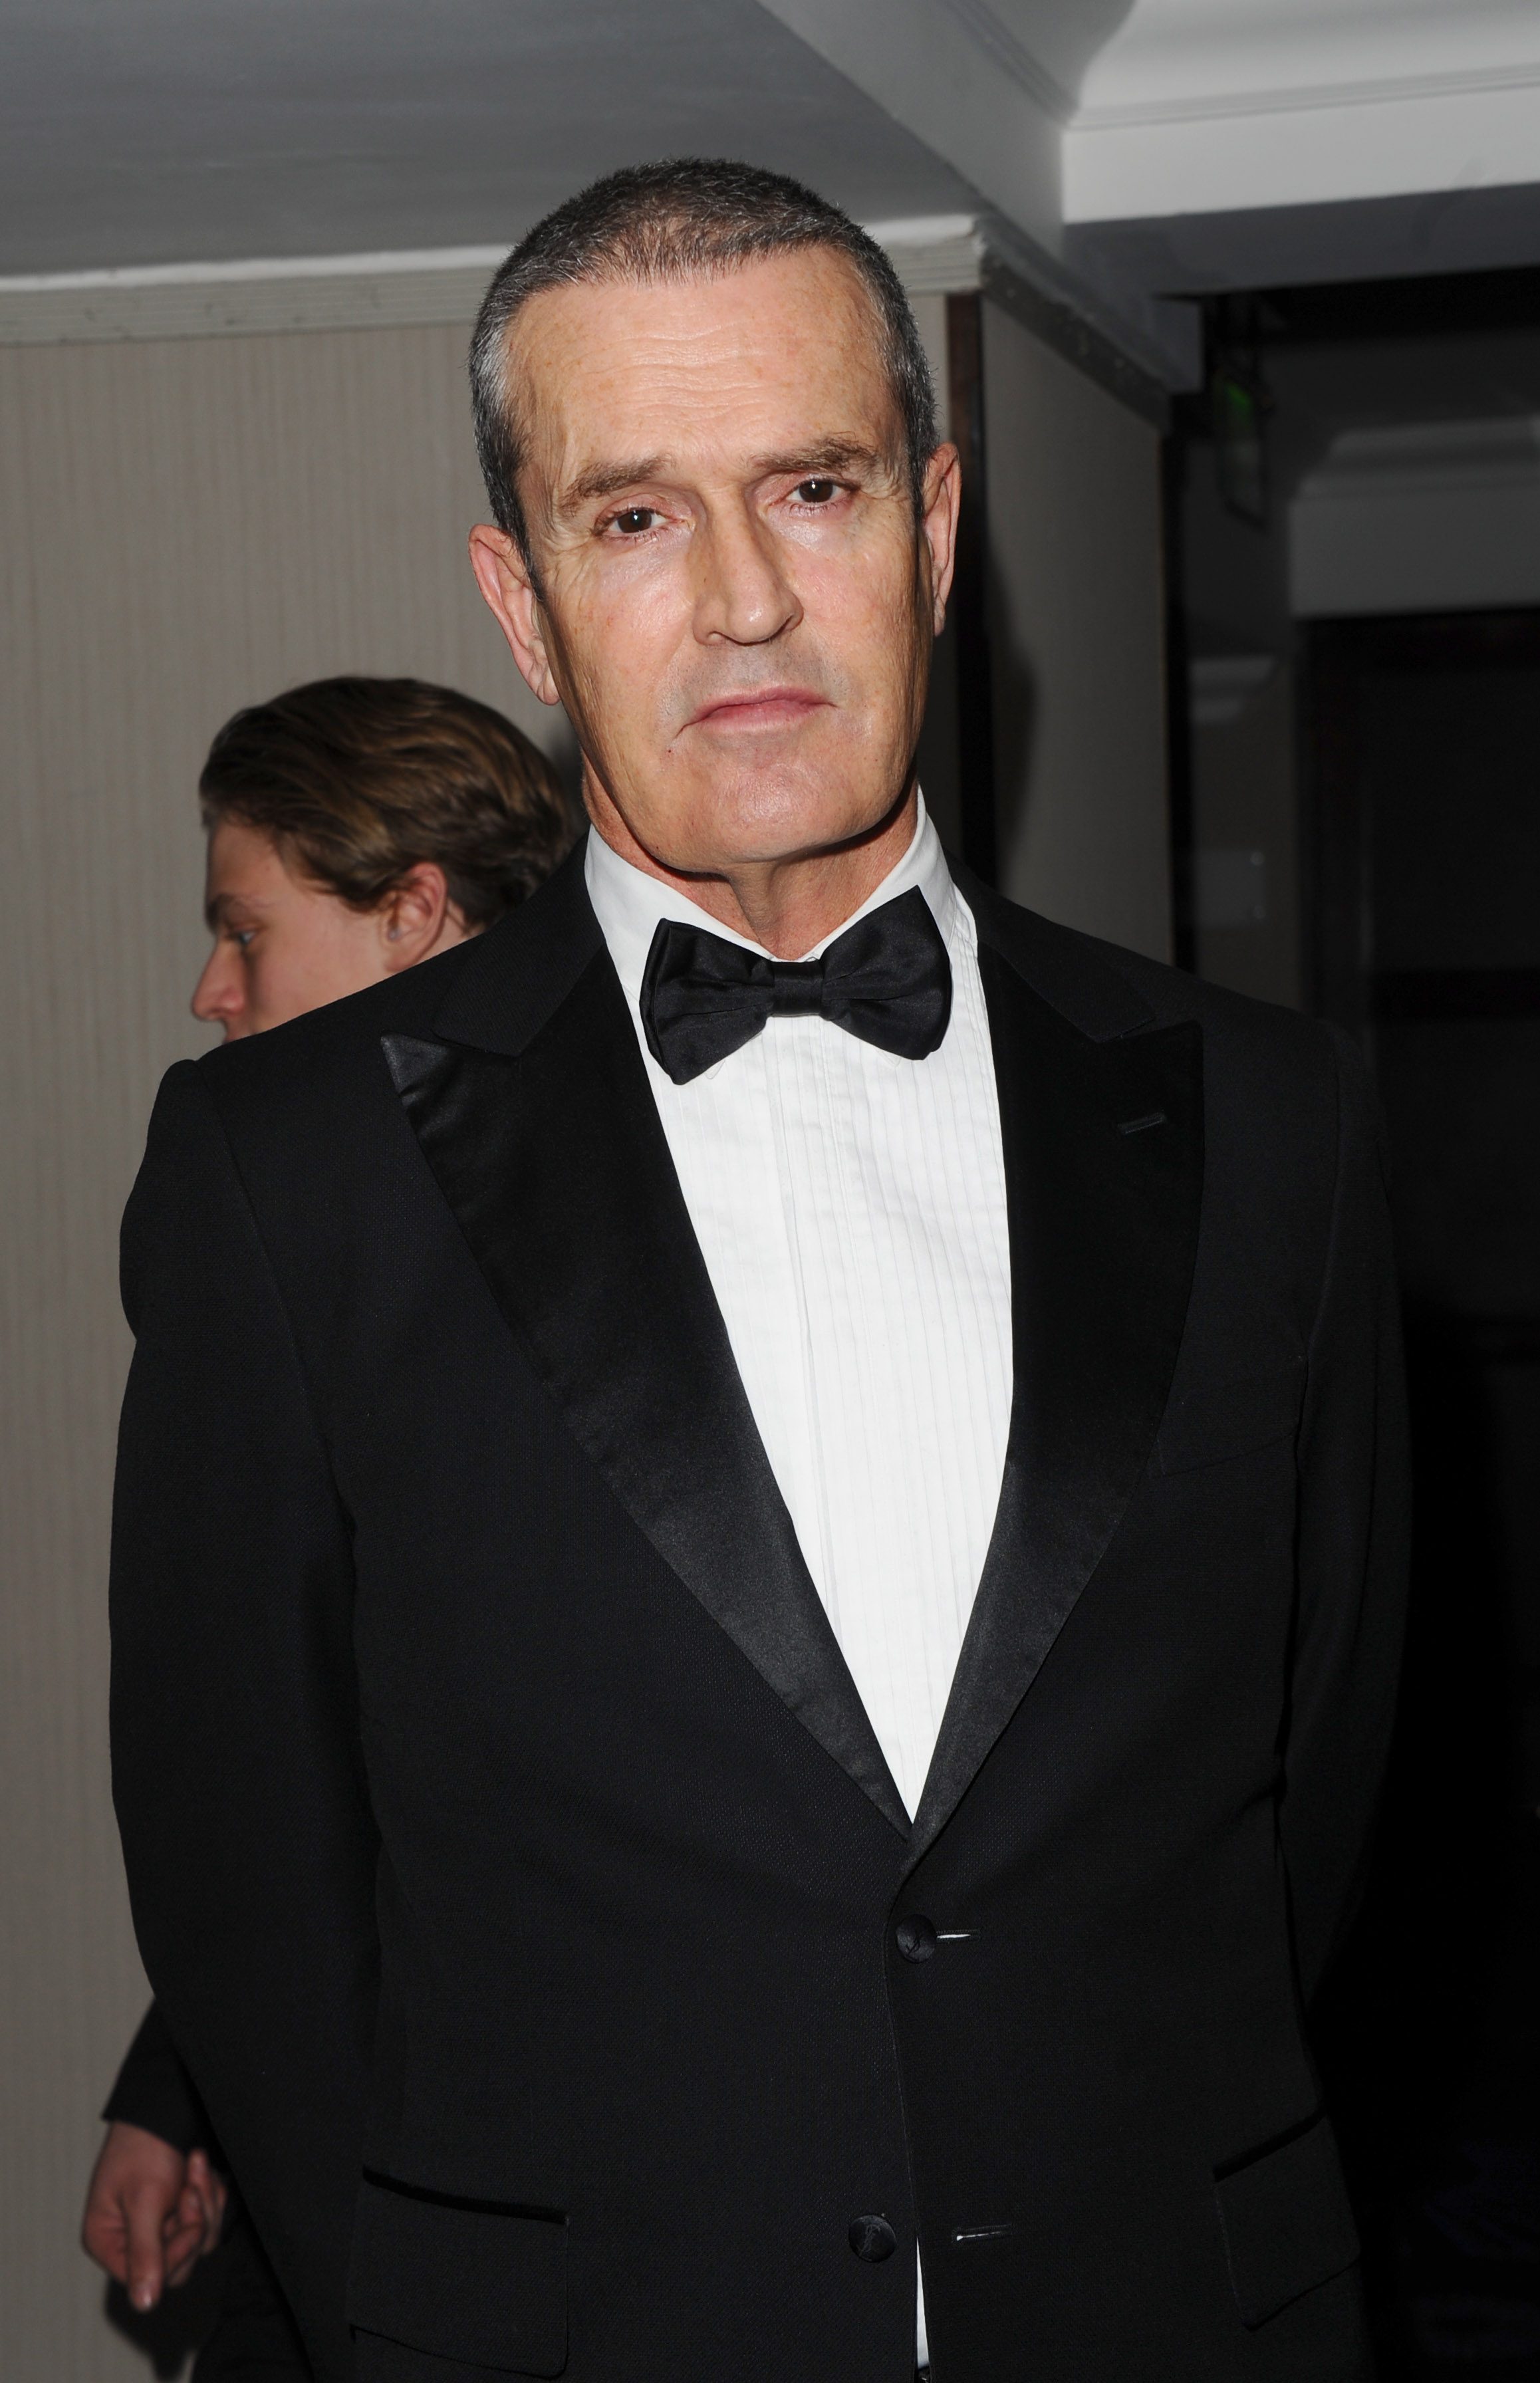 Rupert Everett at The Grosvenor House Hotel on November 21, 2014, in London, England. | Source: Getty Images